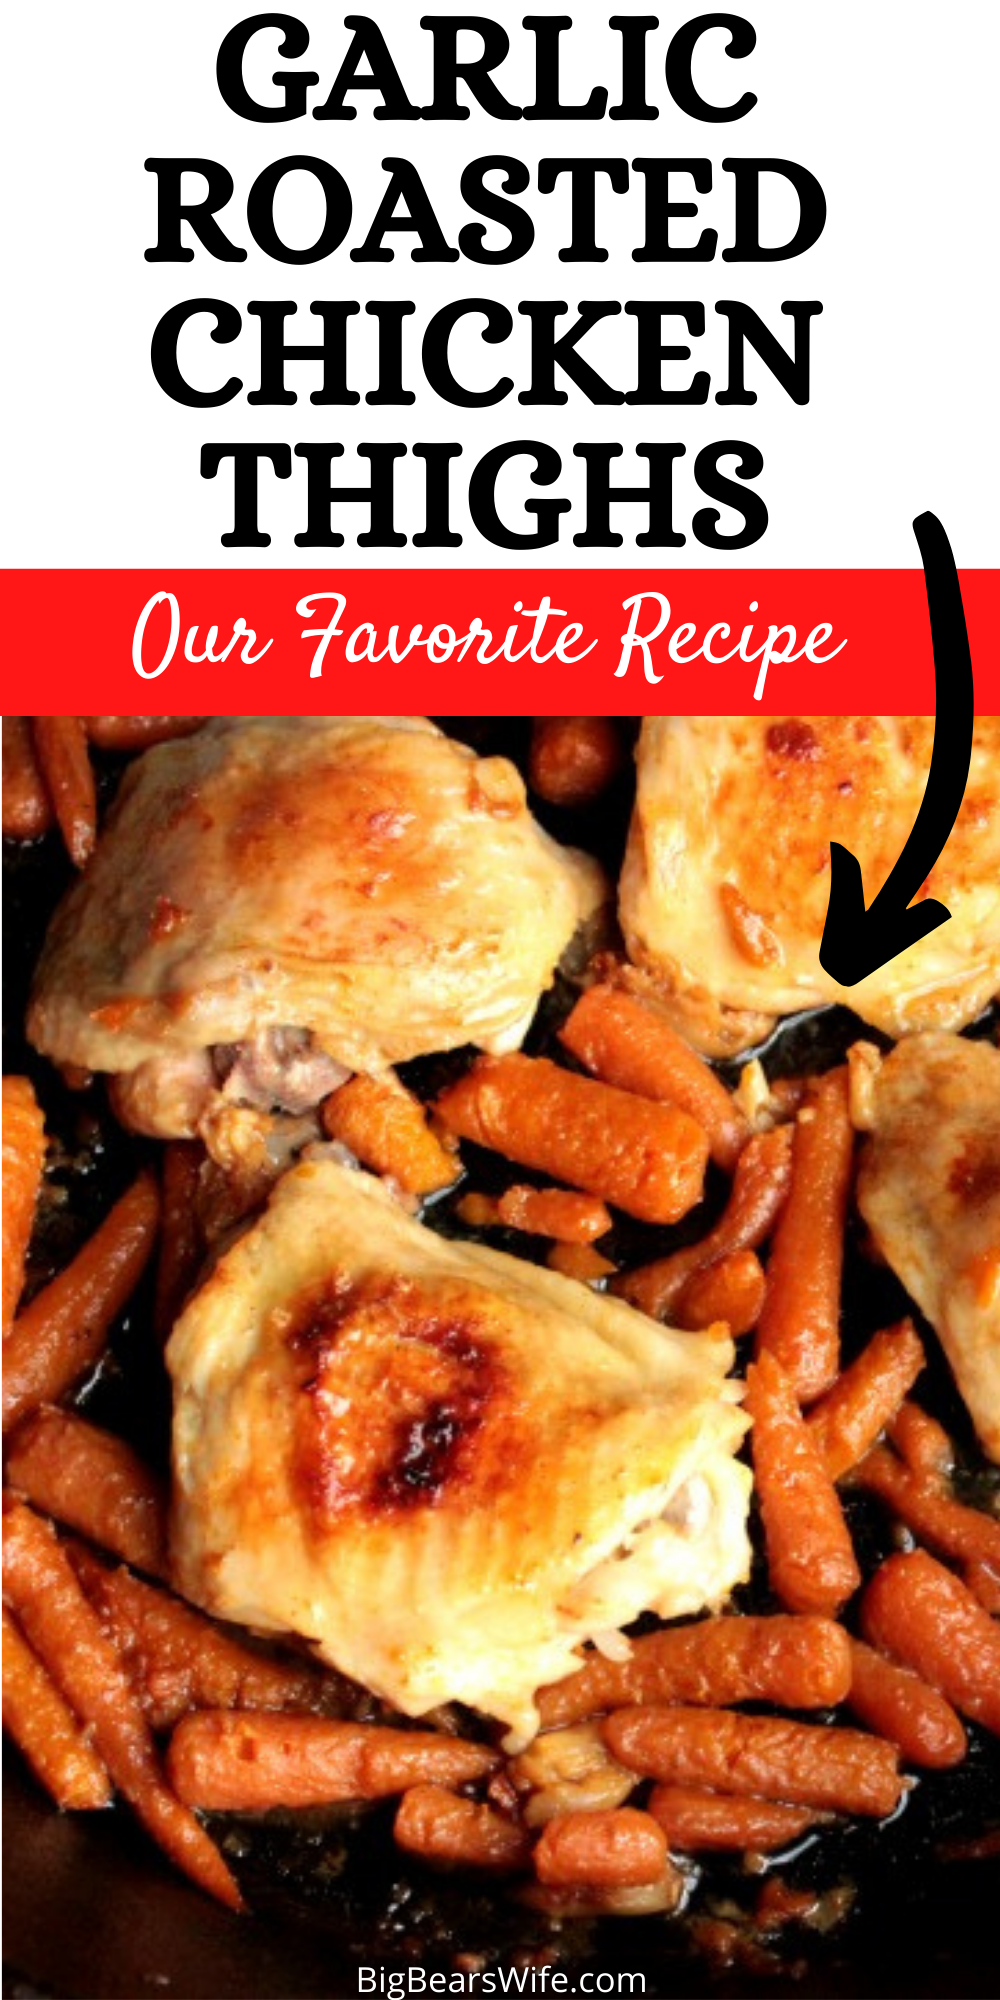 These Garlic Roasted Chicken Thighs are rubbed with minced garlic, cooked low and slow for the juiciest chicken thighs you’ve ever tasted! This is one of the best chicken thigh recipes that I make for our family.

 via @bigbearswife